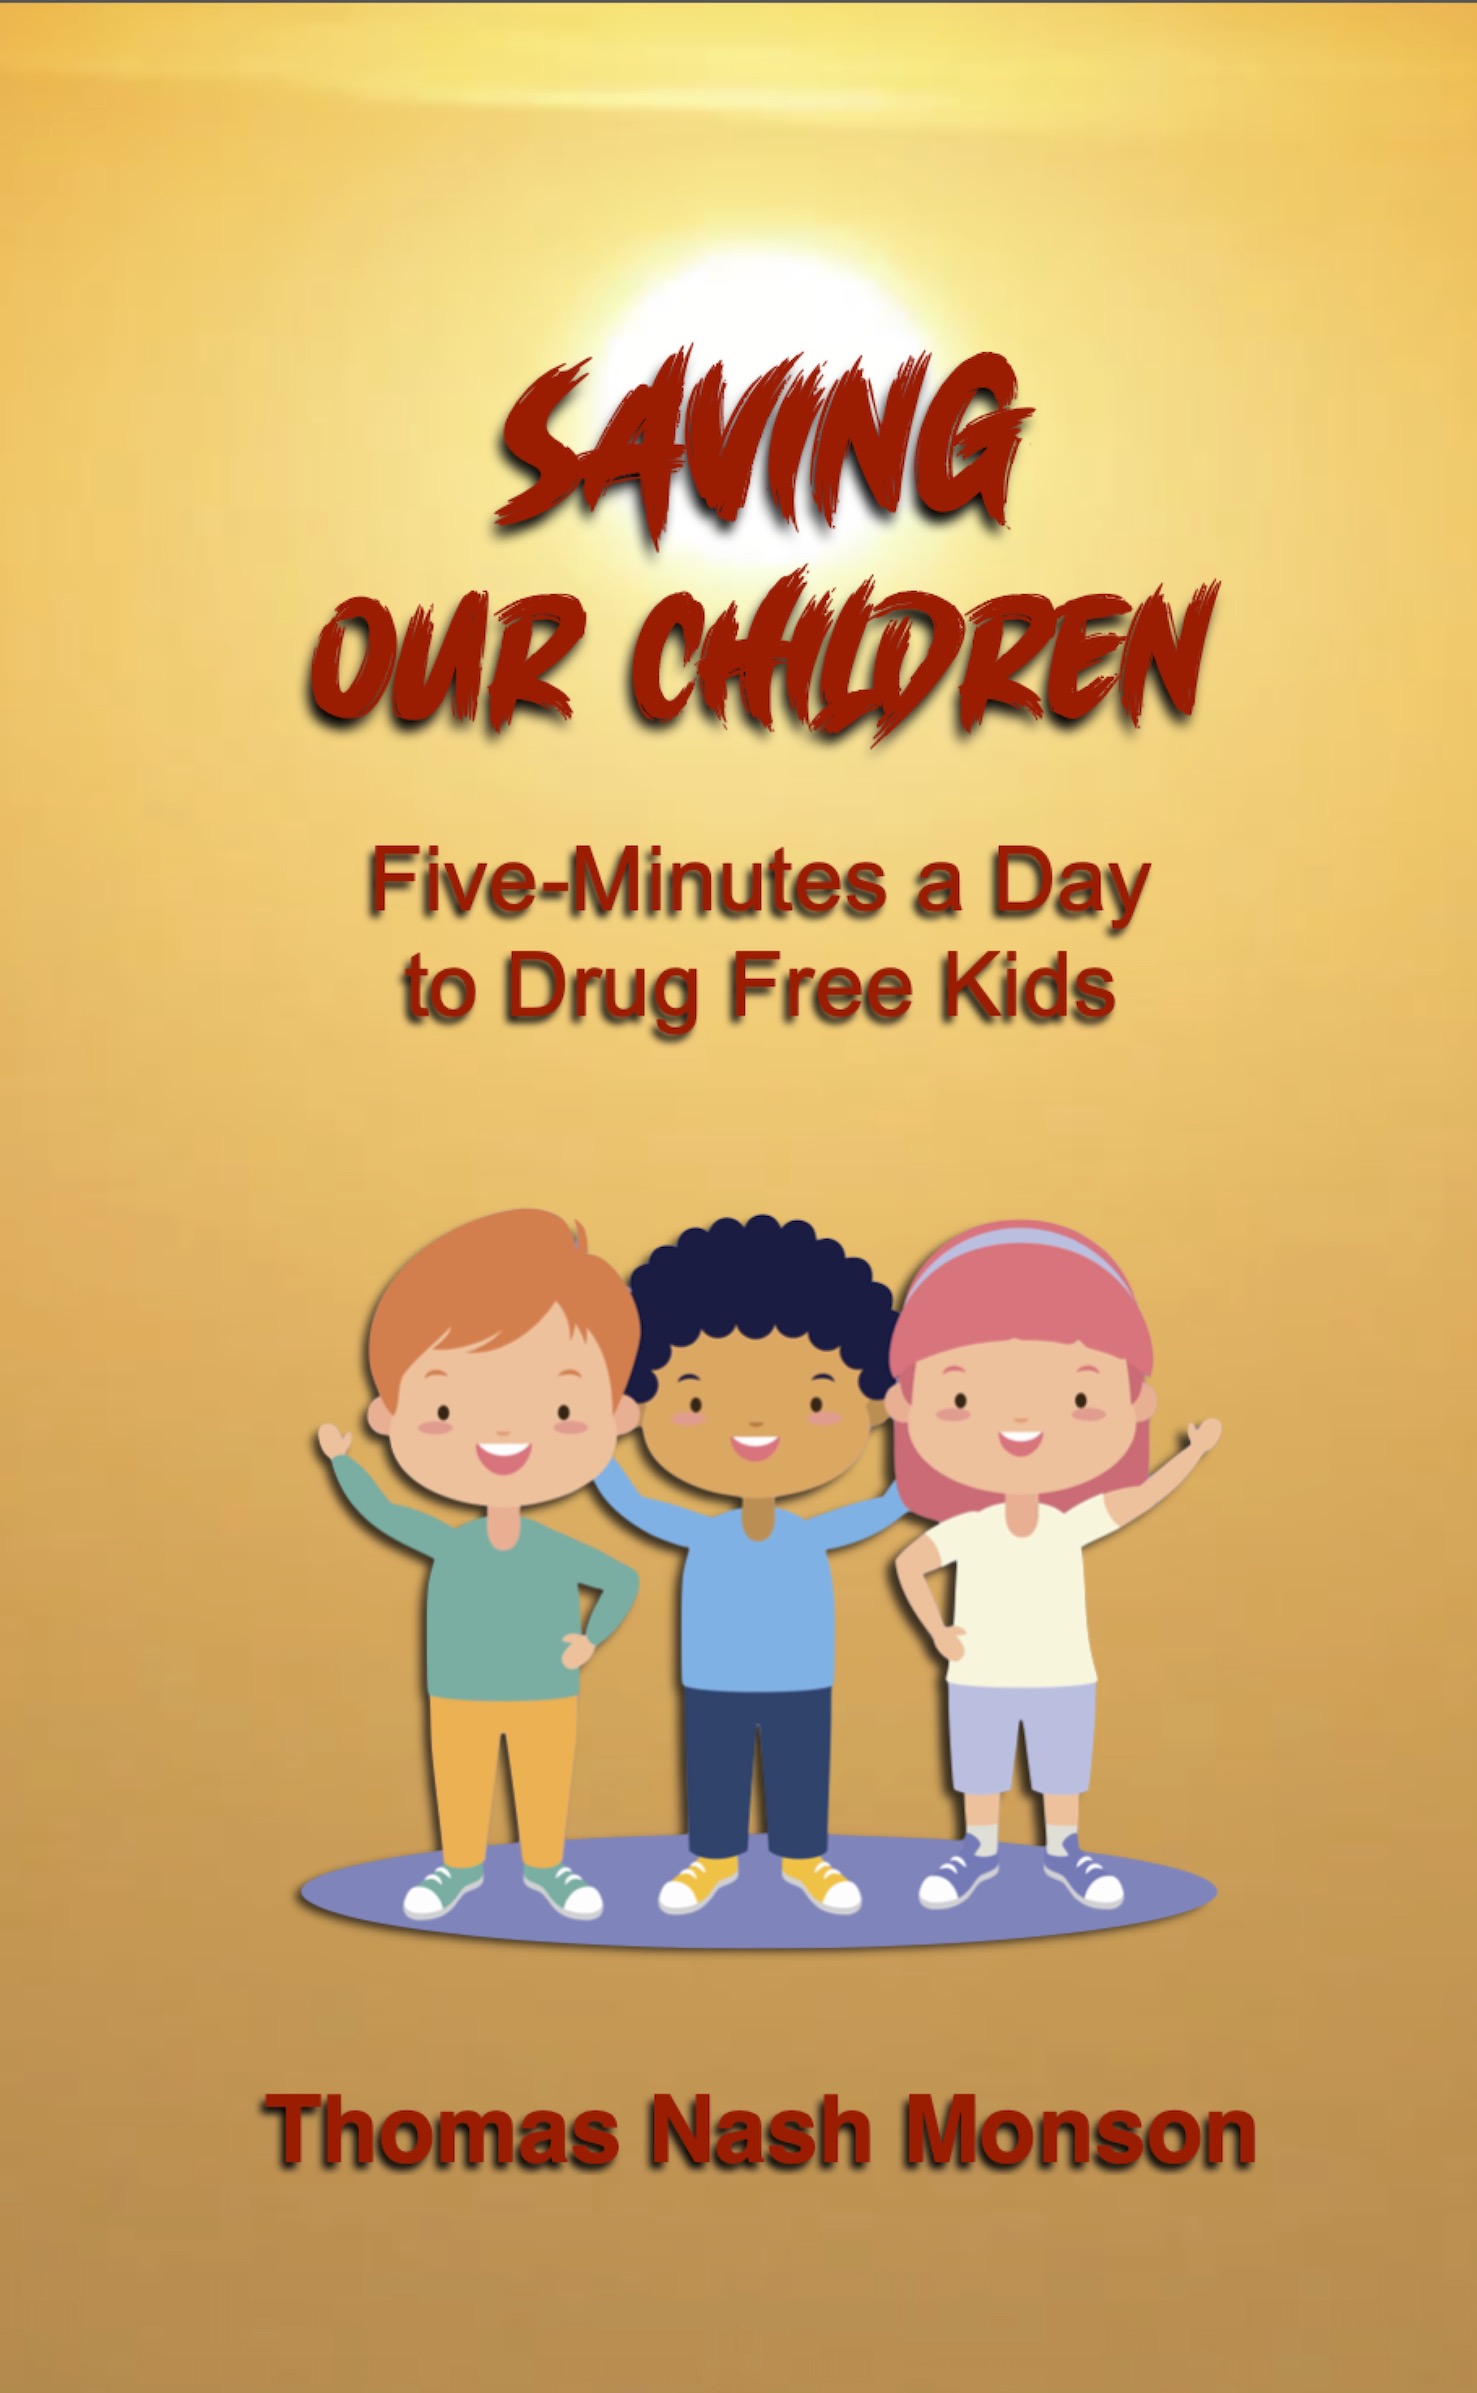 Saving Our Children -- Five Minutes a Day to Drug Free Kids